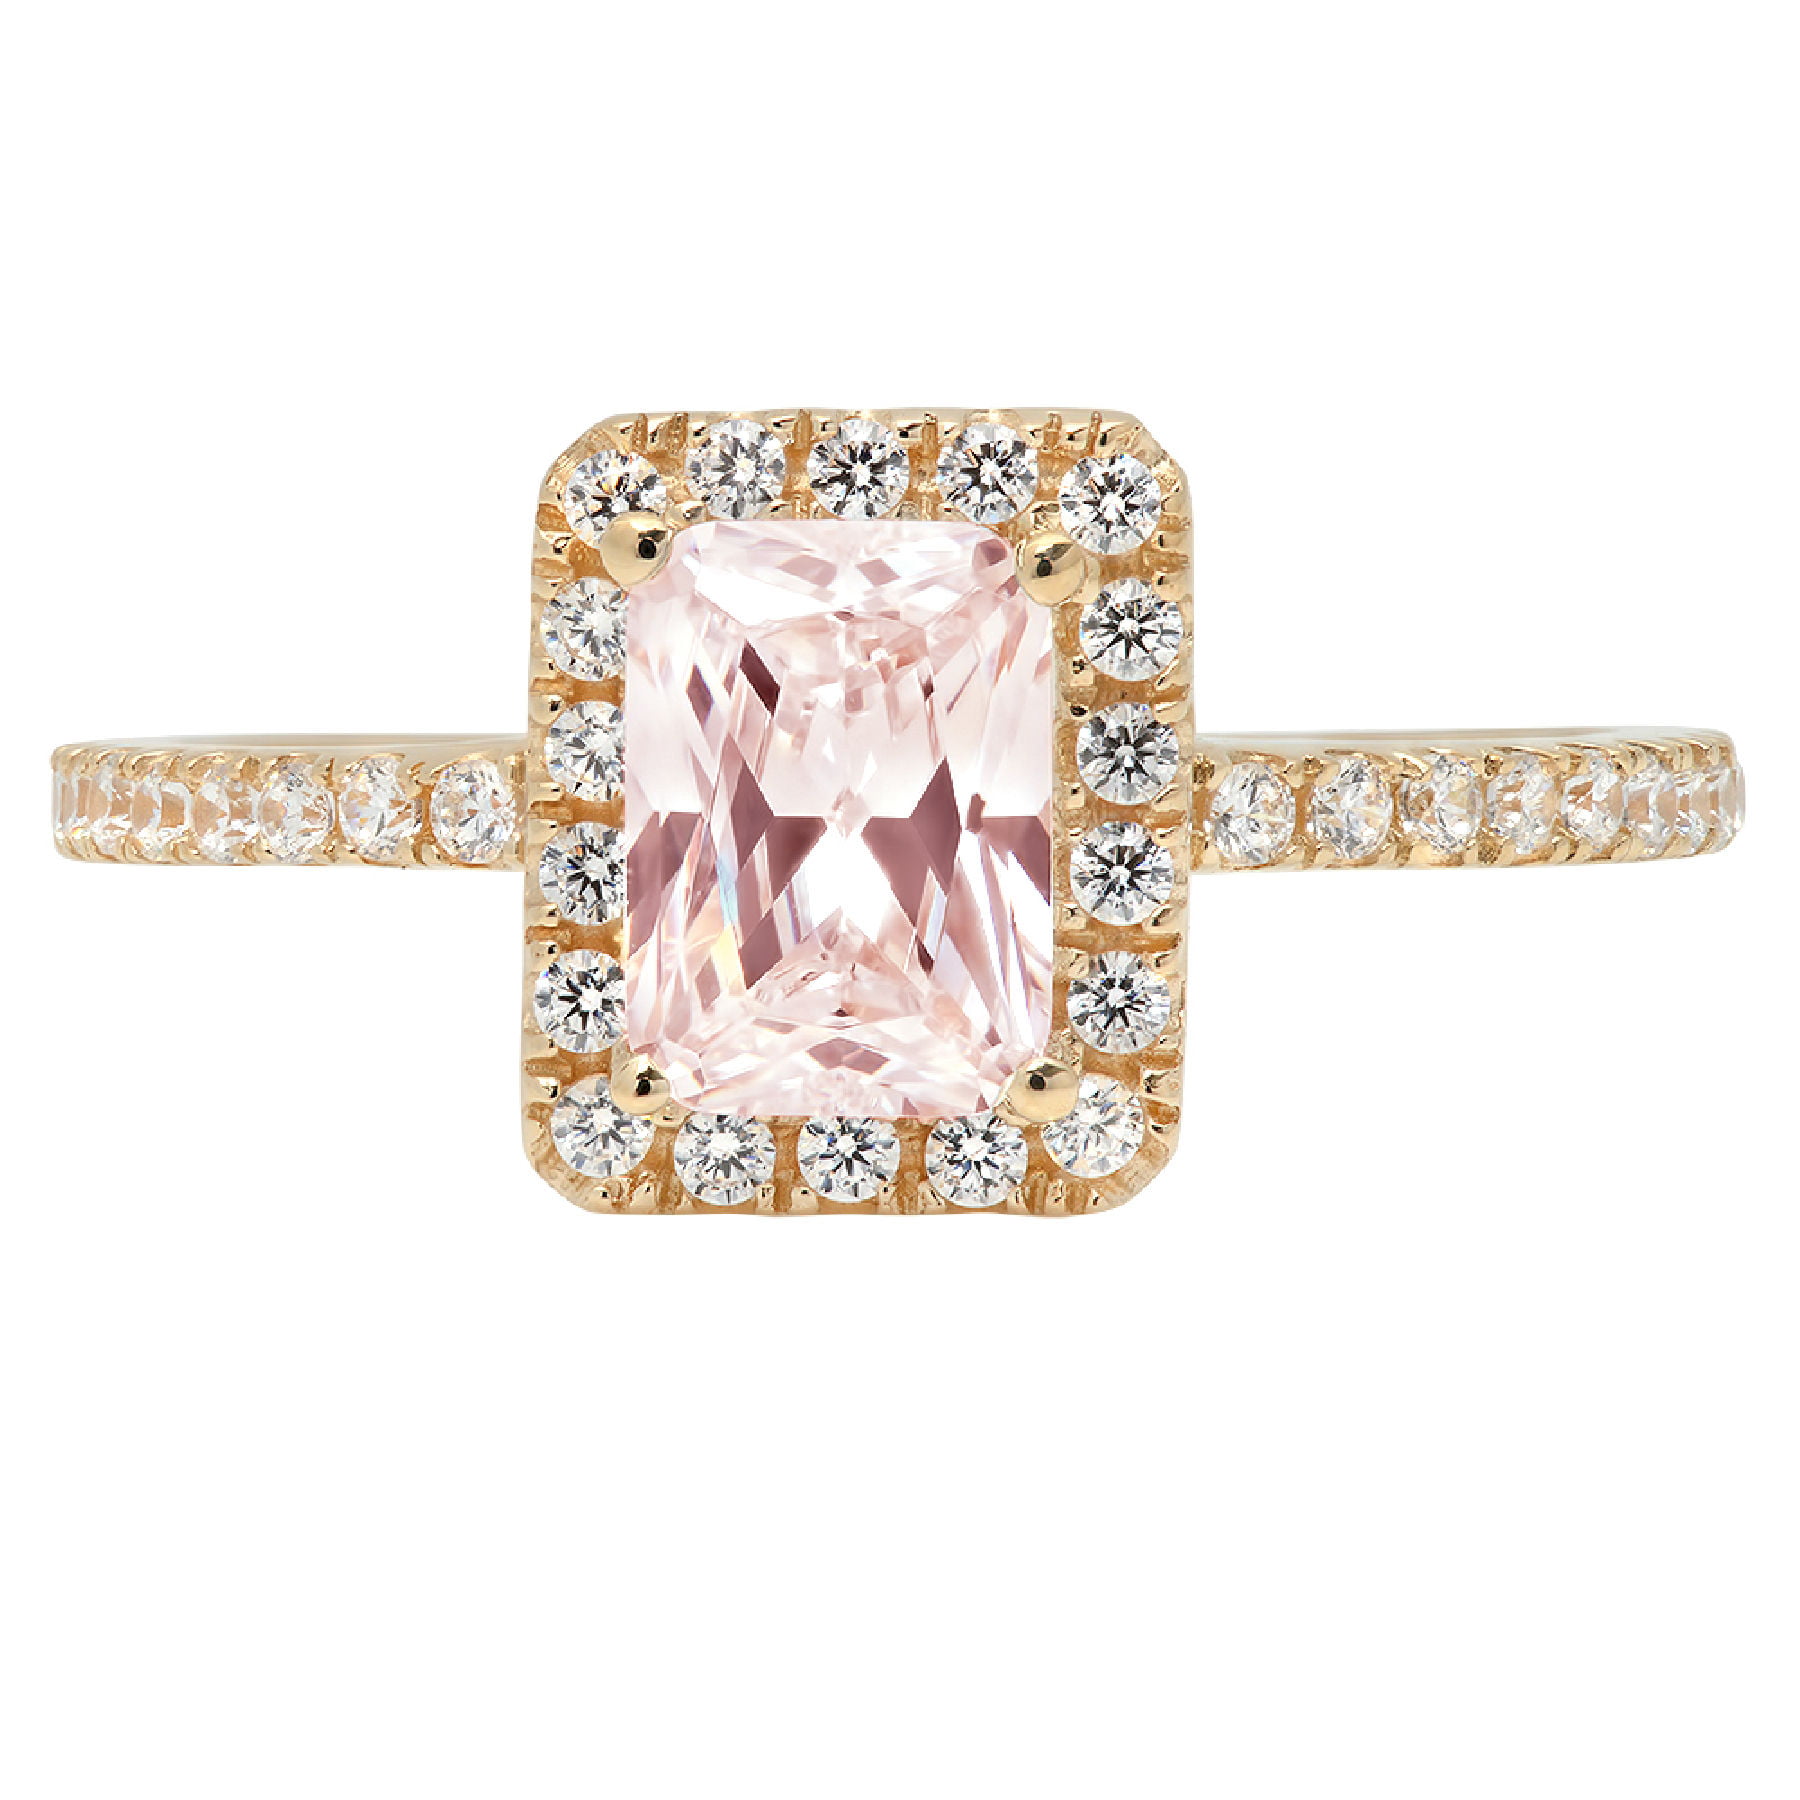 Brilliant Princess Cut Accent Solitaire Engagement Wedding Bridal Promise Ring in Solid 14k Rose Gold For Women 1.86ct